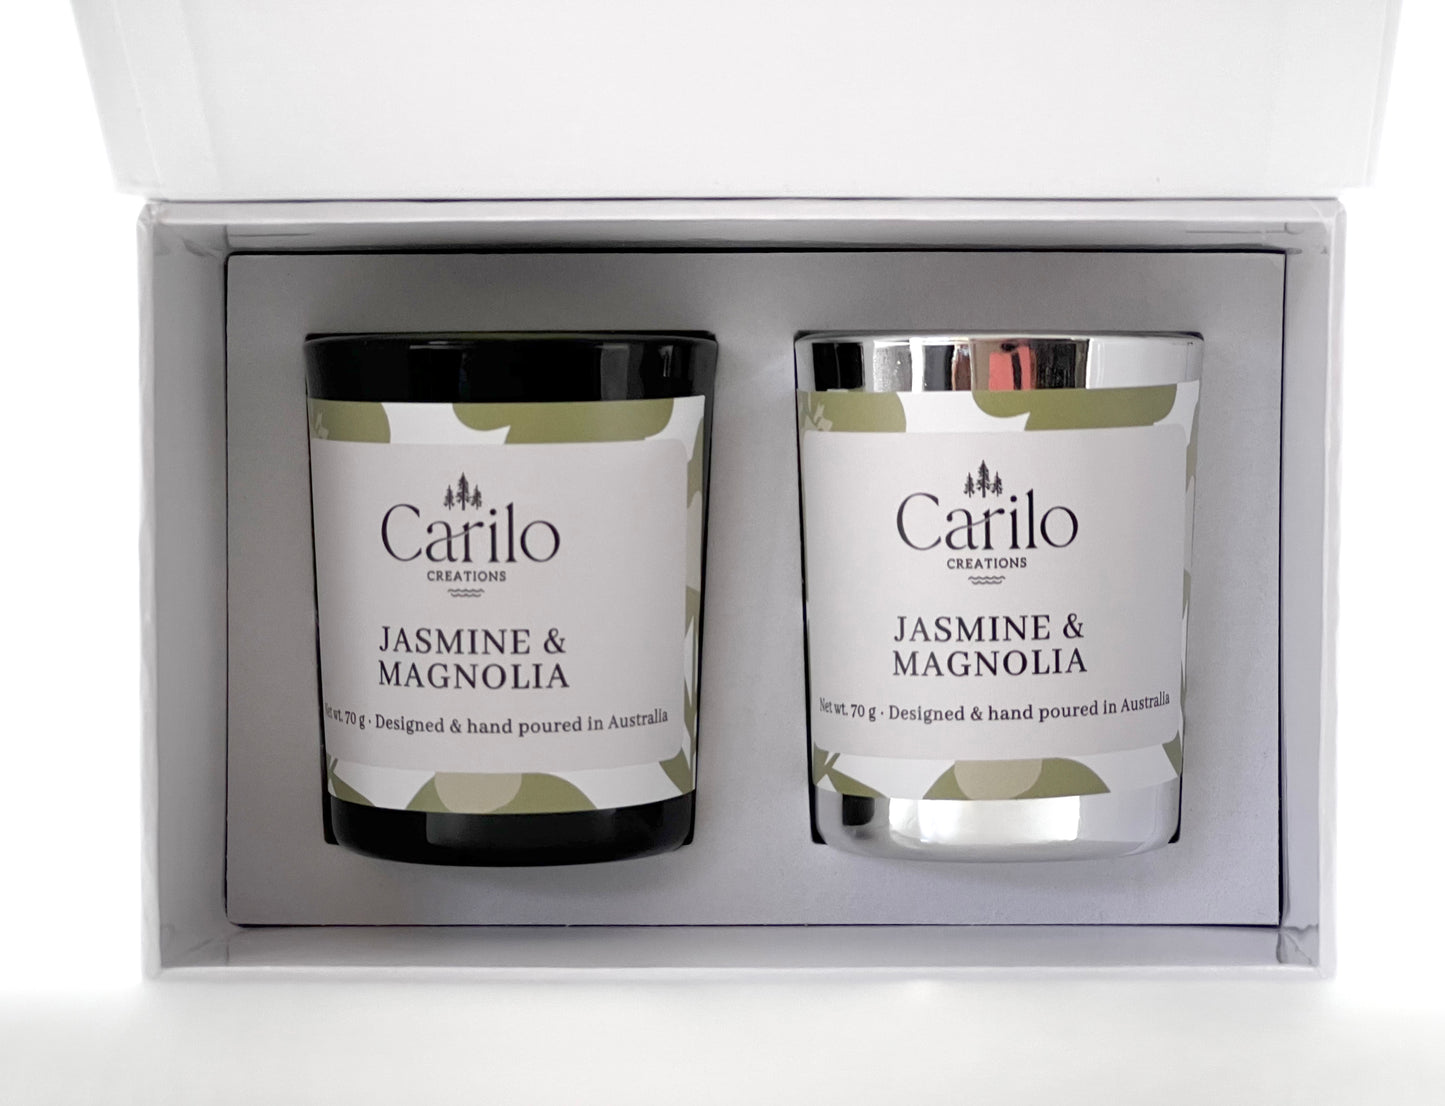 JASMINE & MAGNOLIA - DELUXE DUO SCENTED CANDLES - 70g each